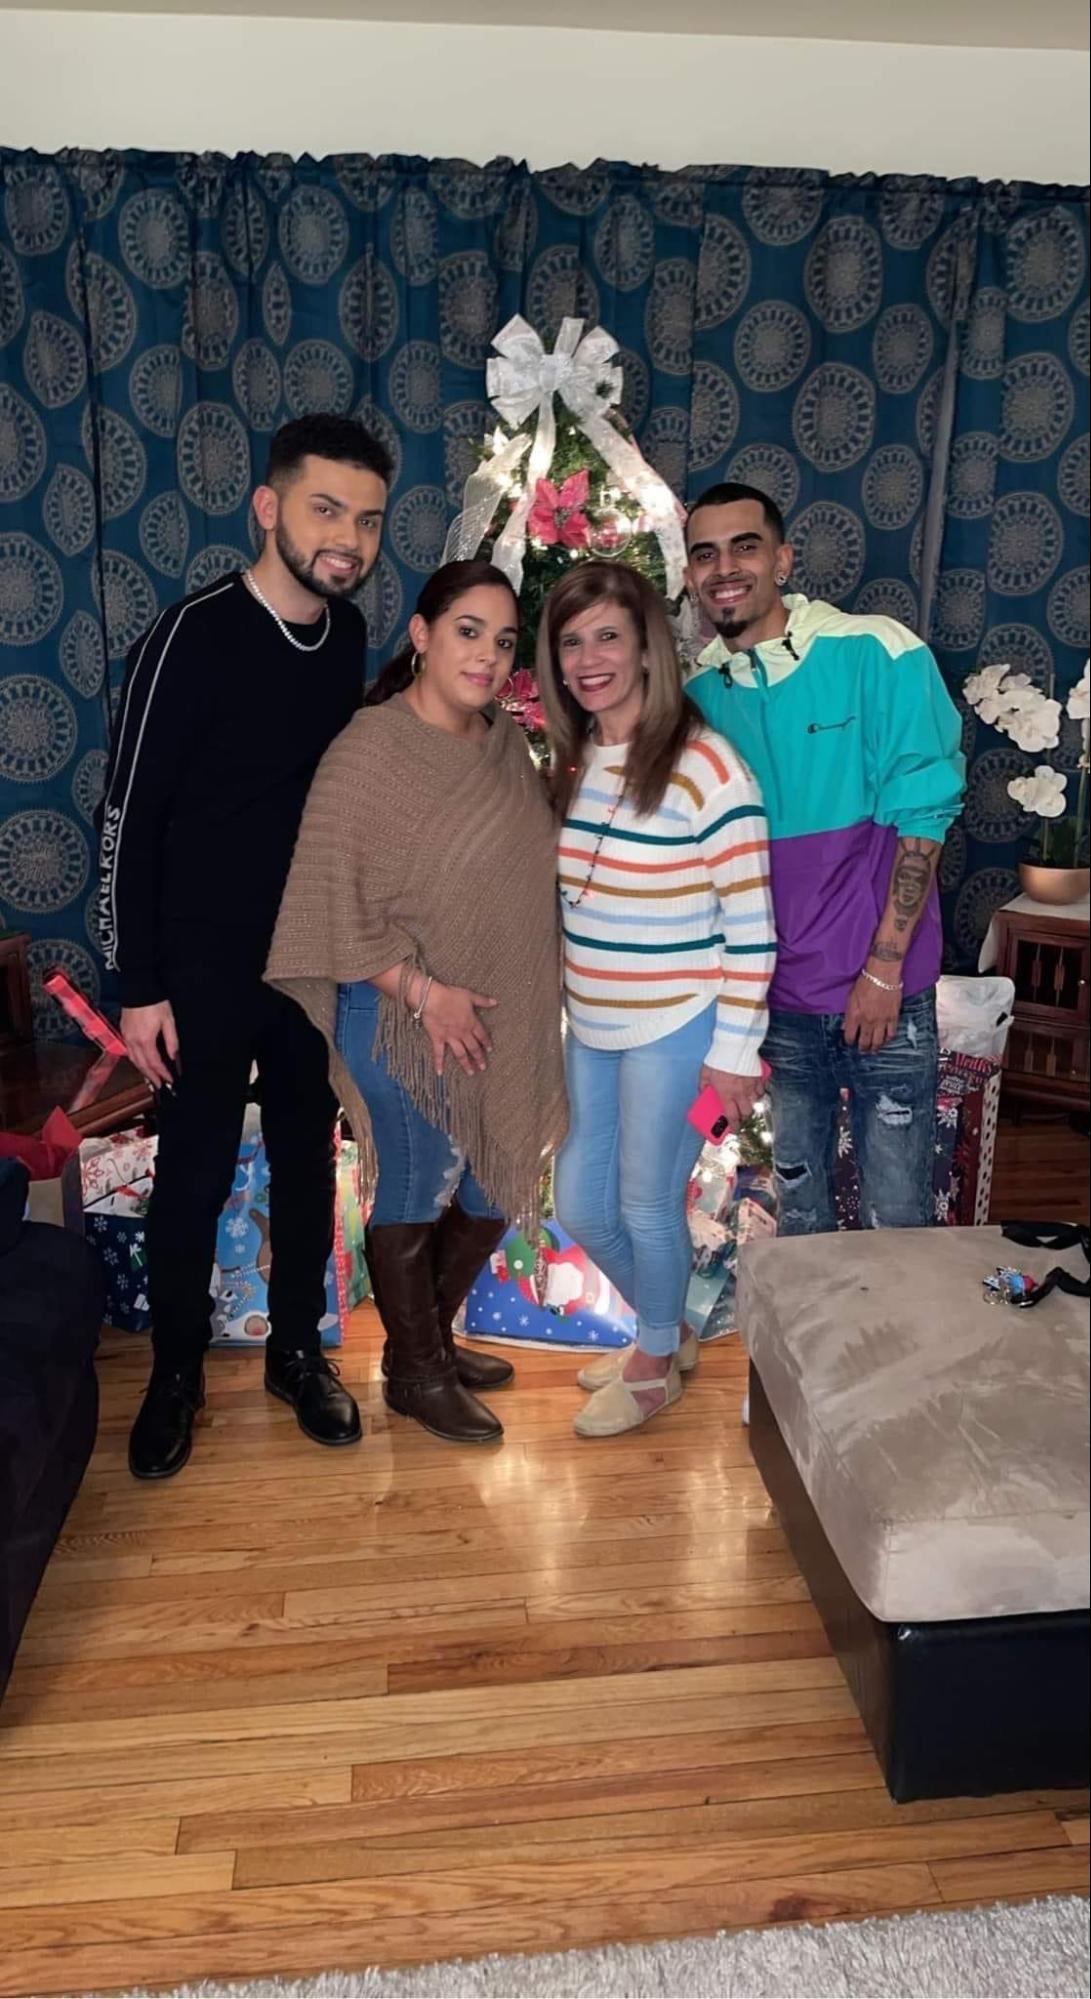 Cindy Sanchez with her family. She is wearing a brown cardigan and is posed next to her family members and her mother. Her mother is wearing a rainbow stripped shirt. The family poses in front of a Christmas tree.